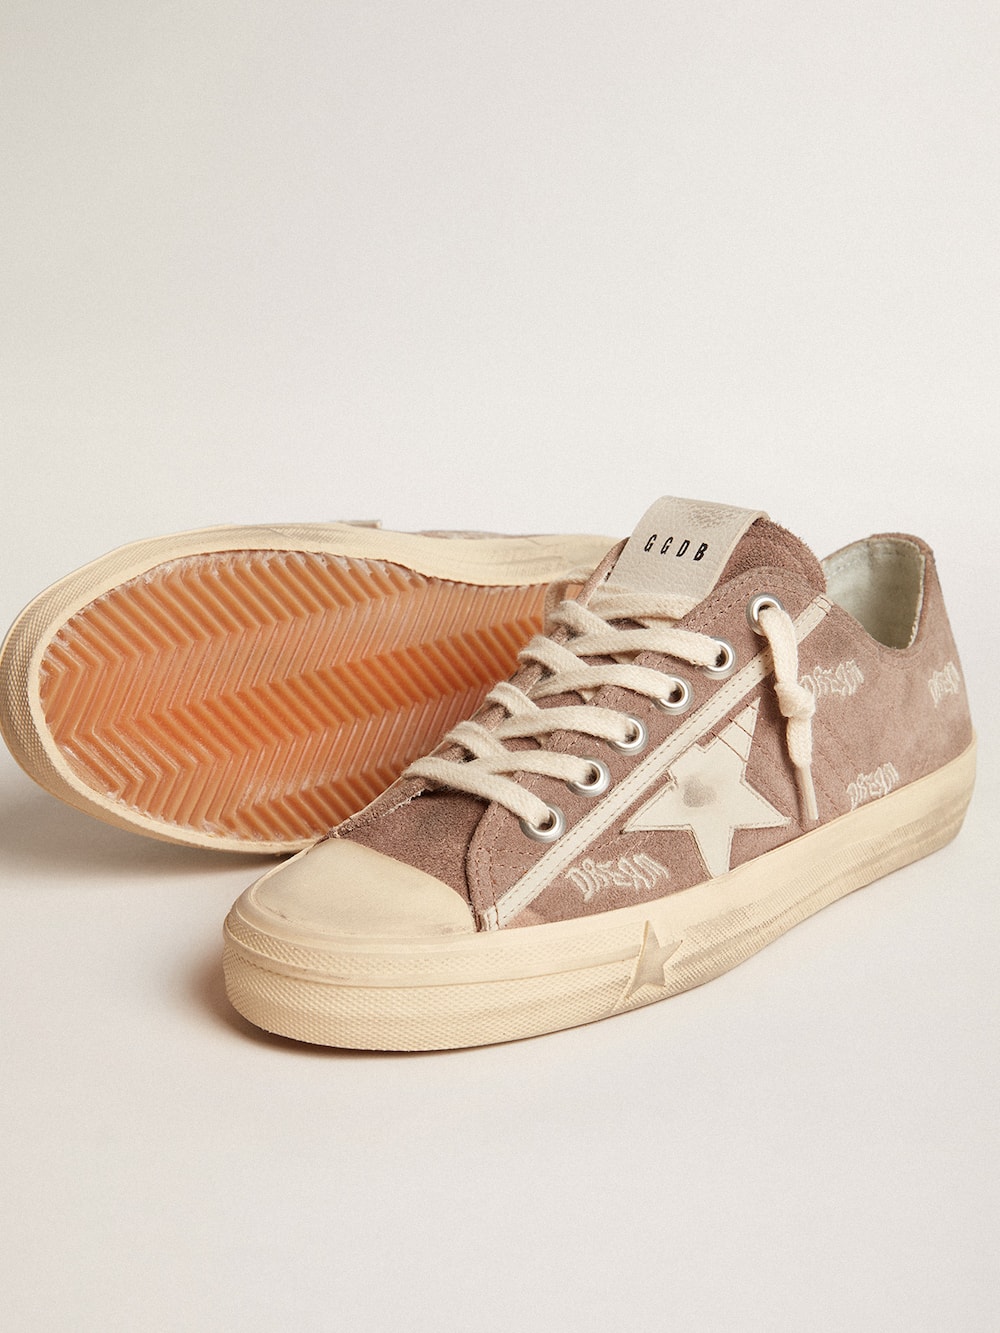 Golden Goose - Women's V-Star in dove-gray suede with light gray leather star in 